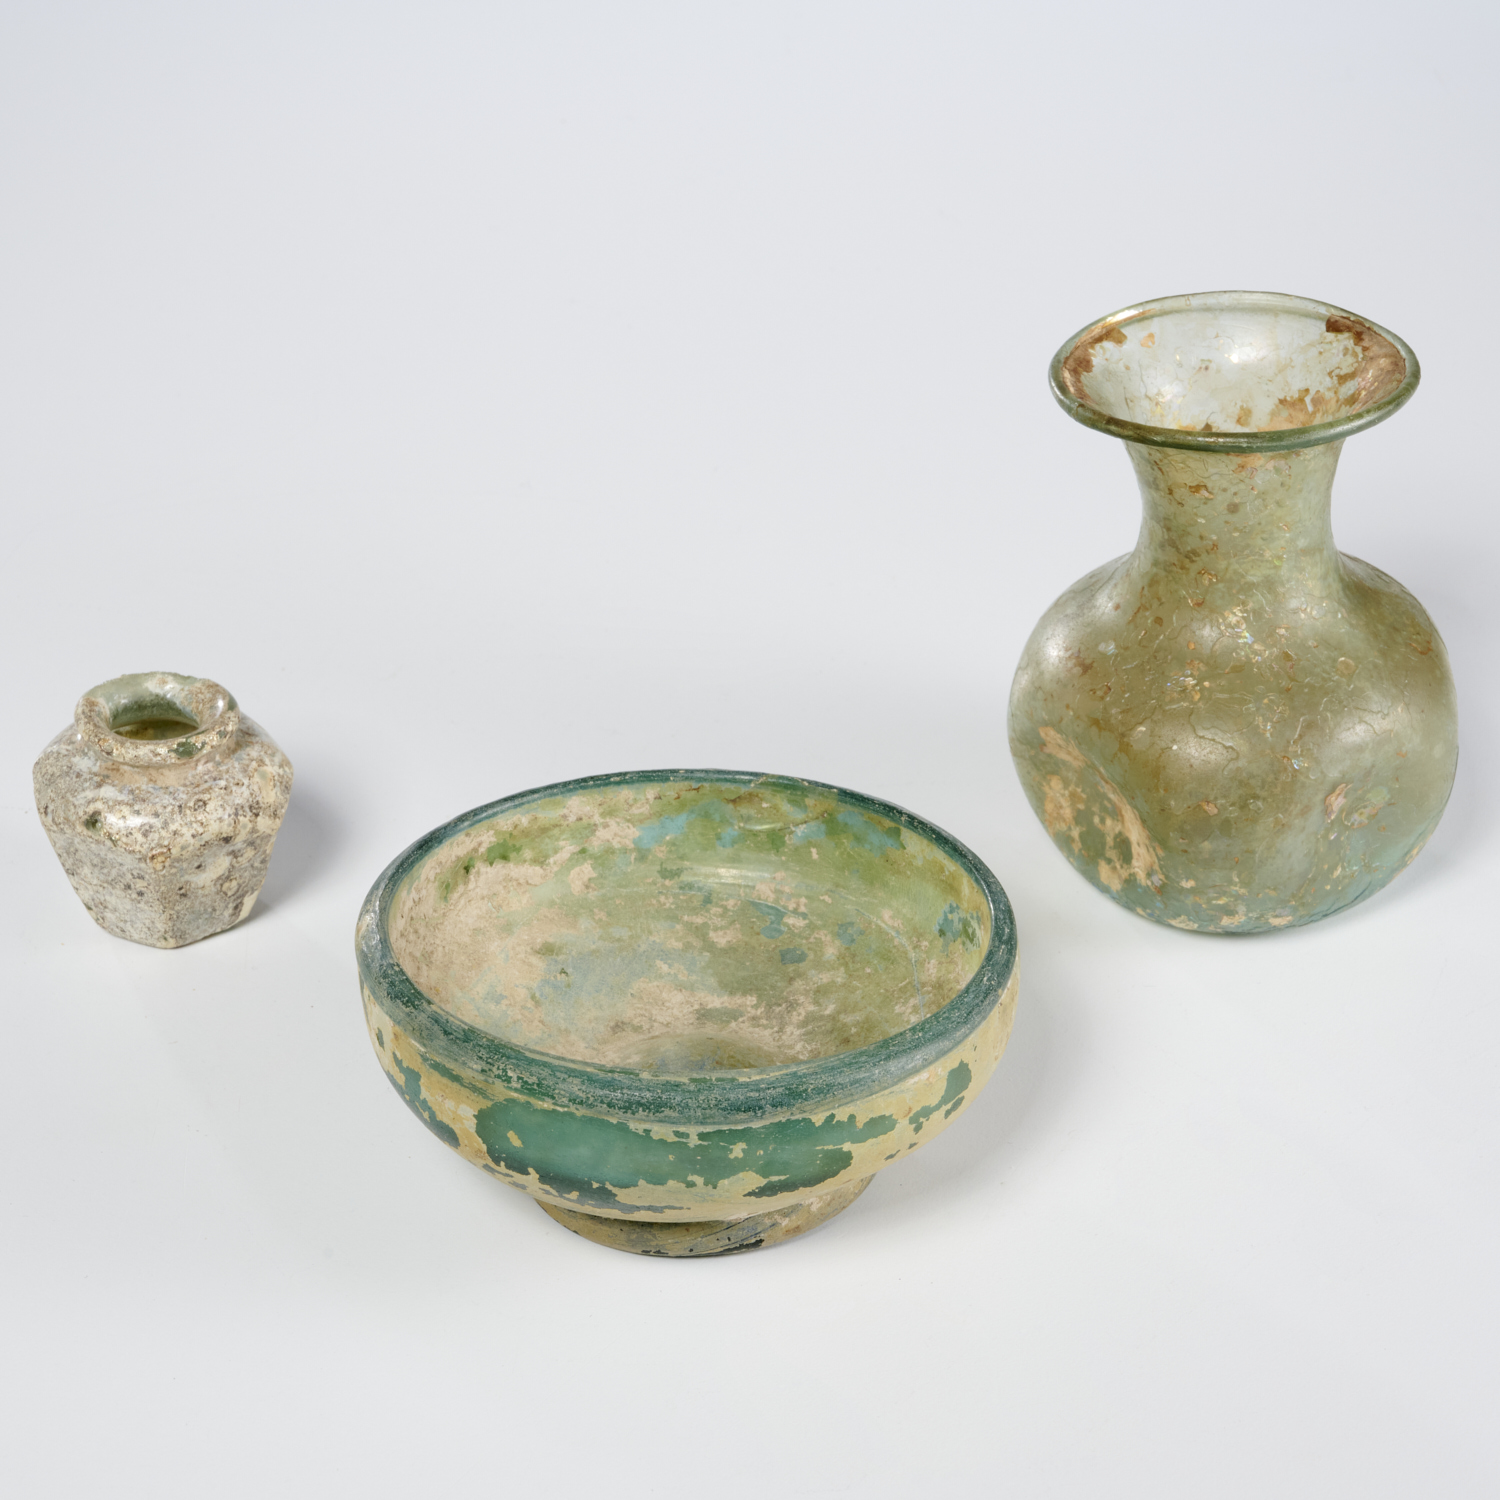 (3) ROMAN STYLE GLASS VESSELS Possibly